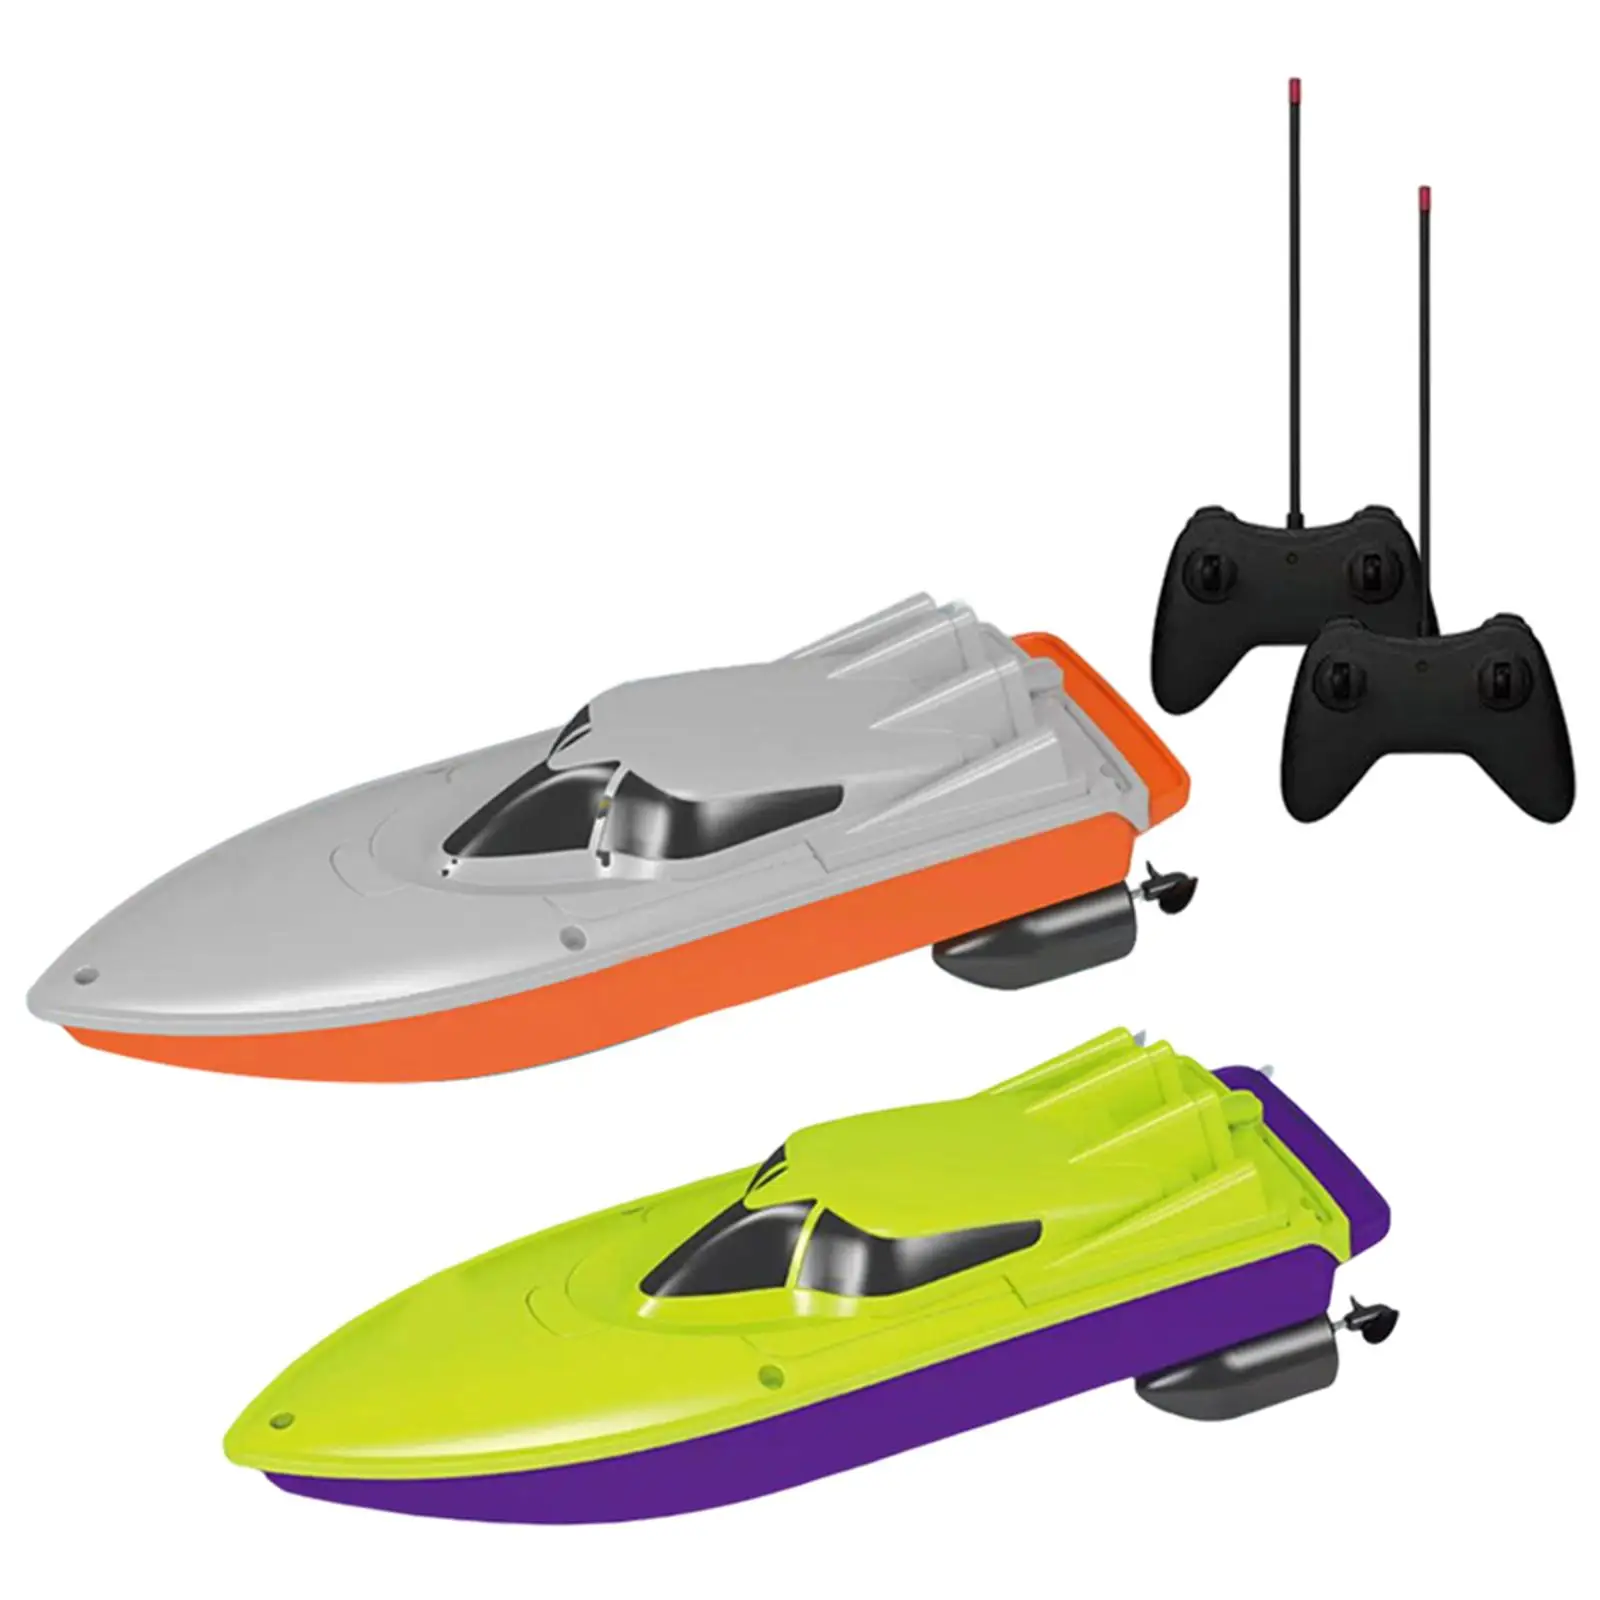 RC Boat 10+ MPH Electric Ship Yacht Toys Waterproof for Outdoor Sports Toy,